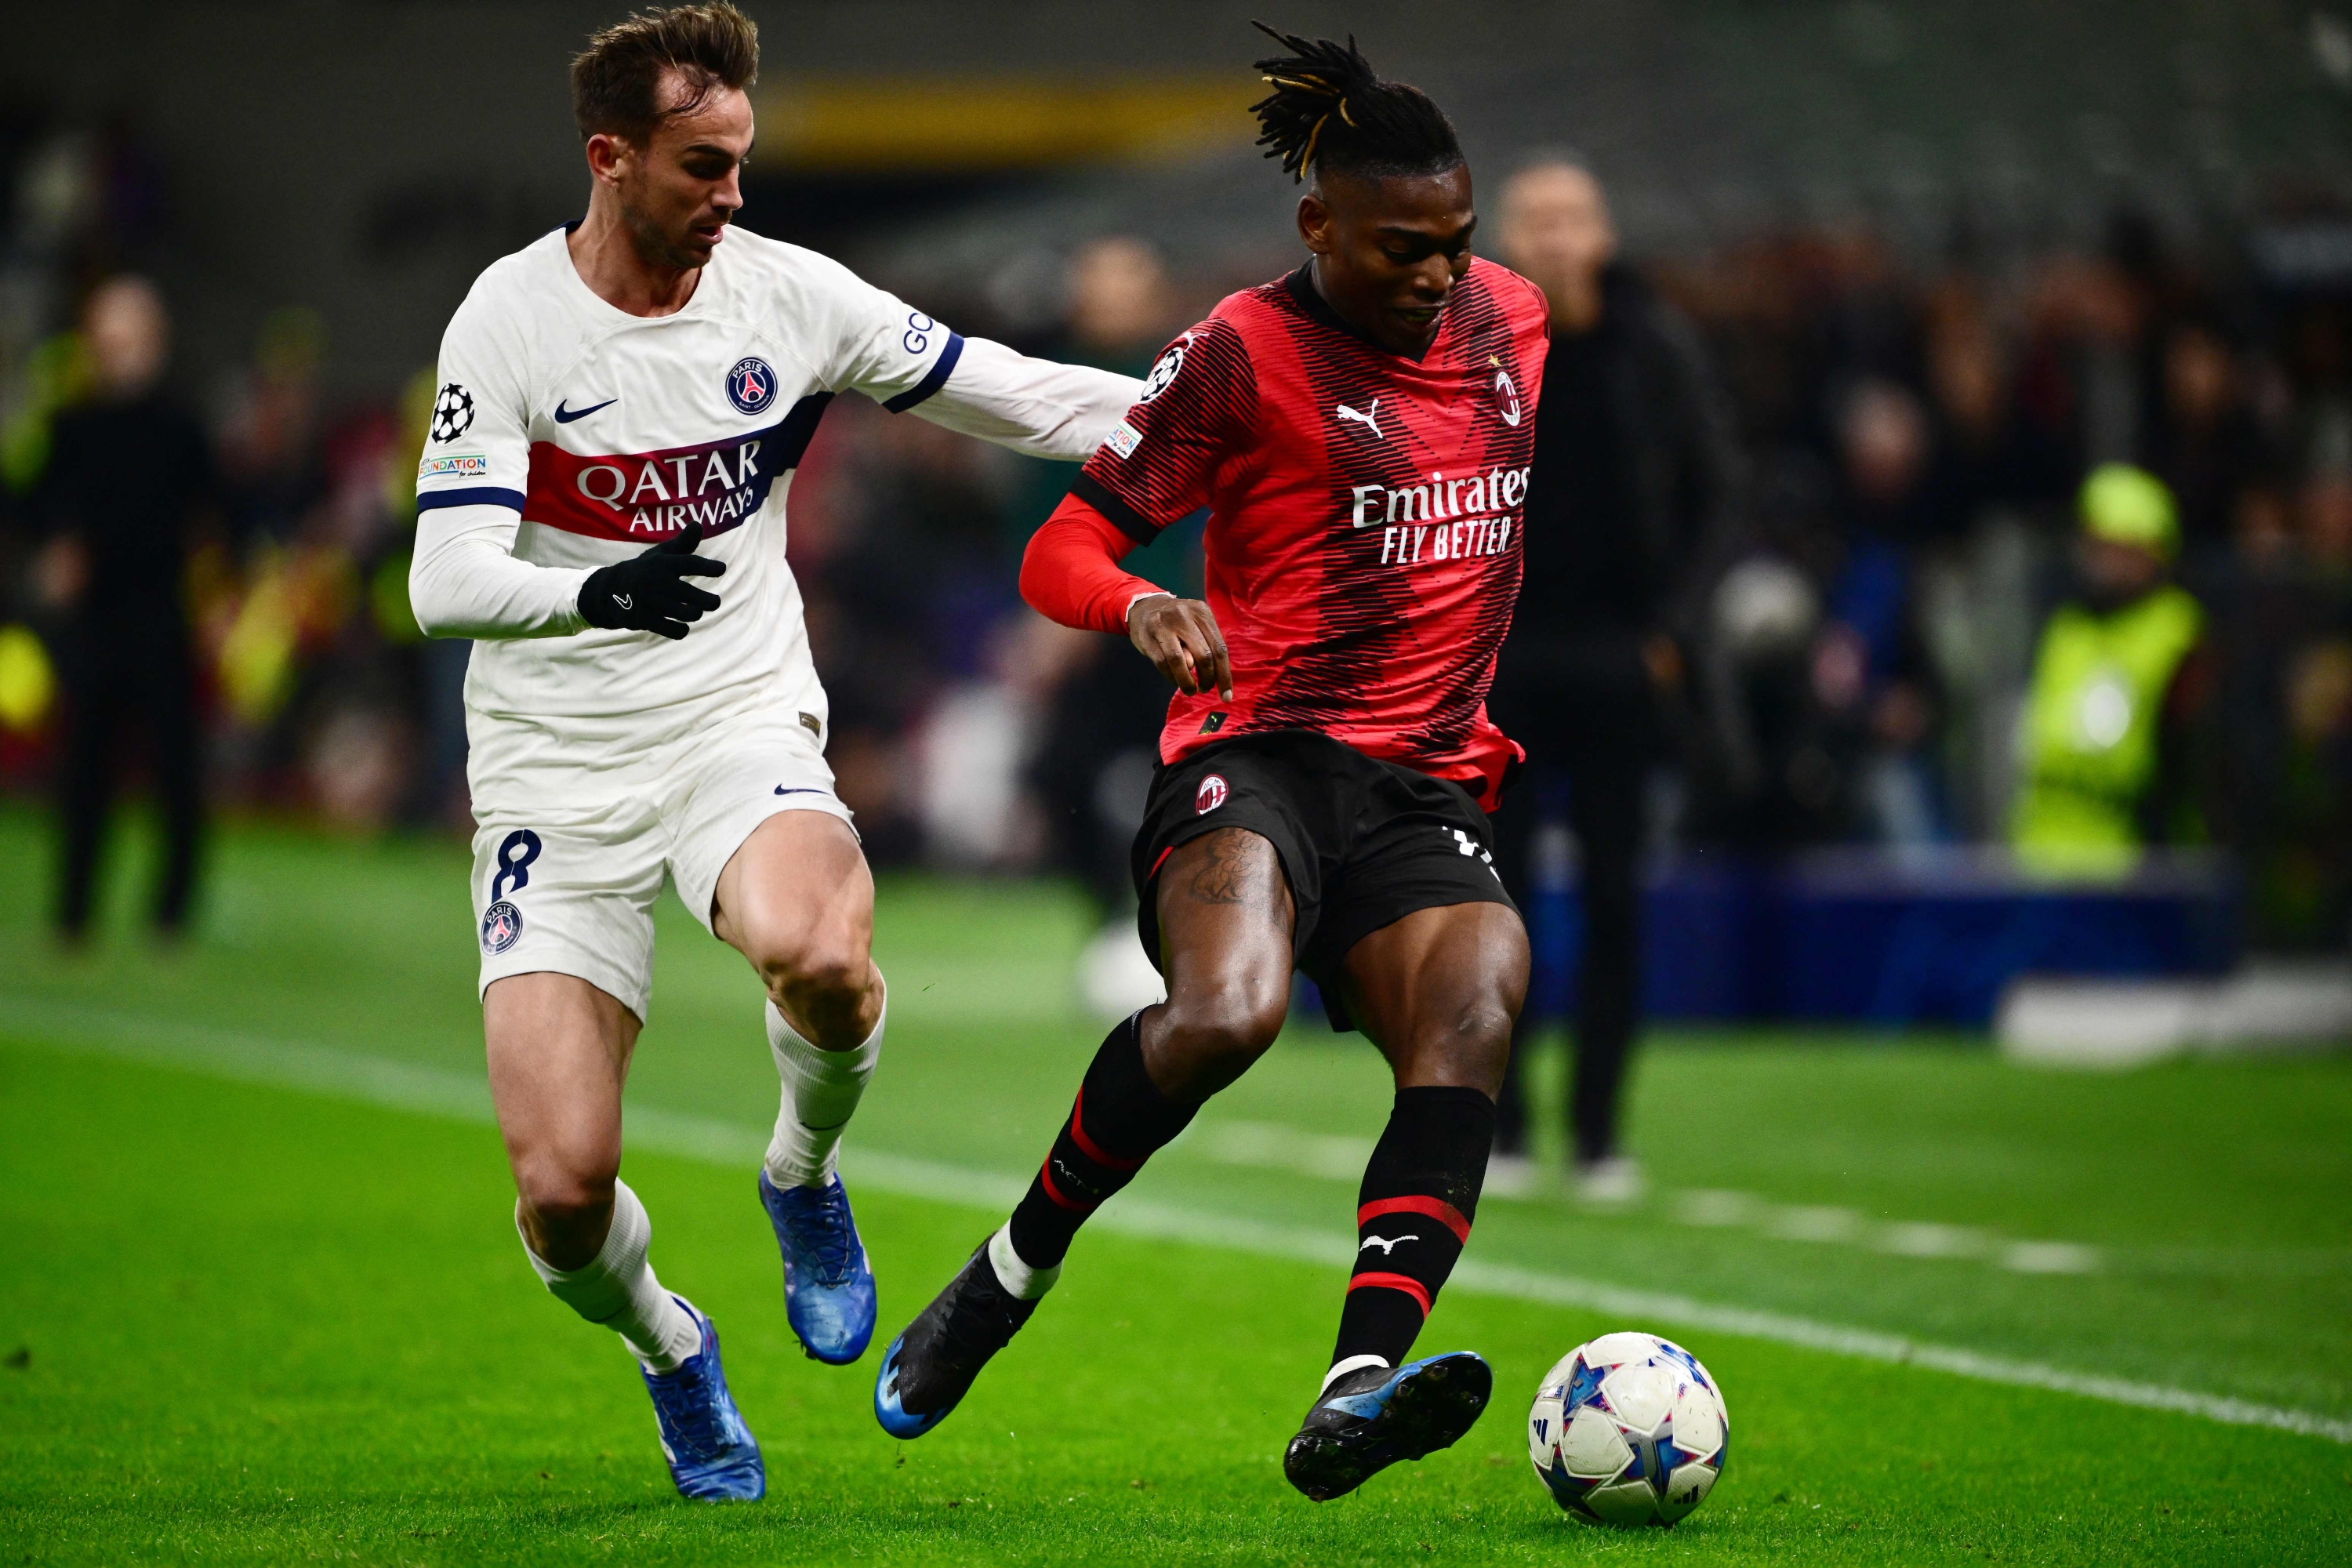 Paris Saint-Germain's Spanish midfielder #08 Fabian Ruiz fights for the ball with AC Milan's Portuguese forward #10 Rafael Leao during the UEFA Champions League 1st round group F football match between AC Milan and Paris Saint-Germain at the San Siro stadium in Milan on November 7, 2023. (Photo by Marco BERTORELLO / AFP)